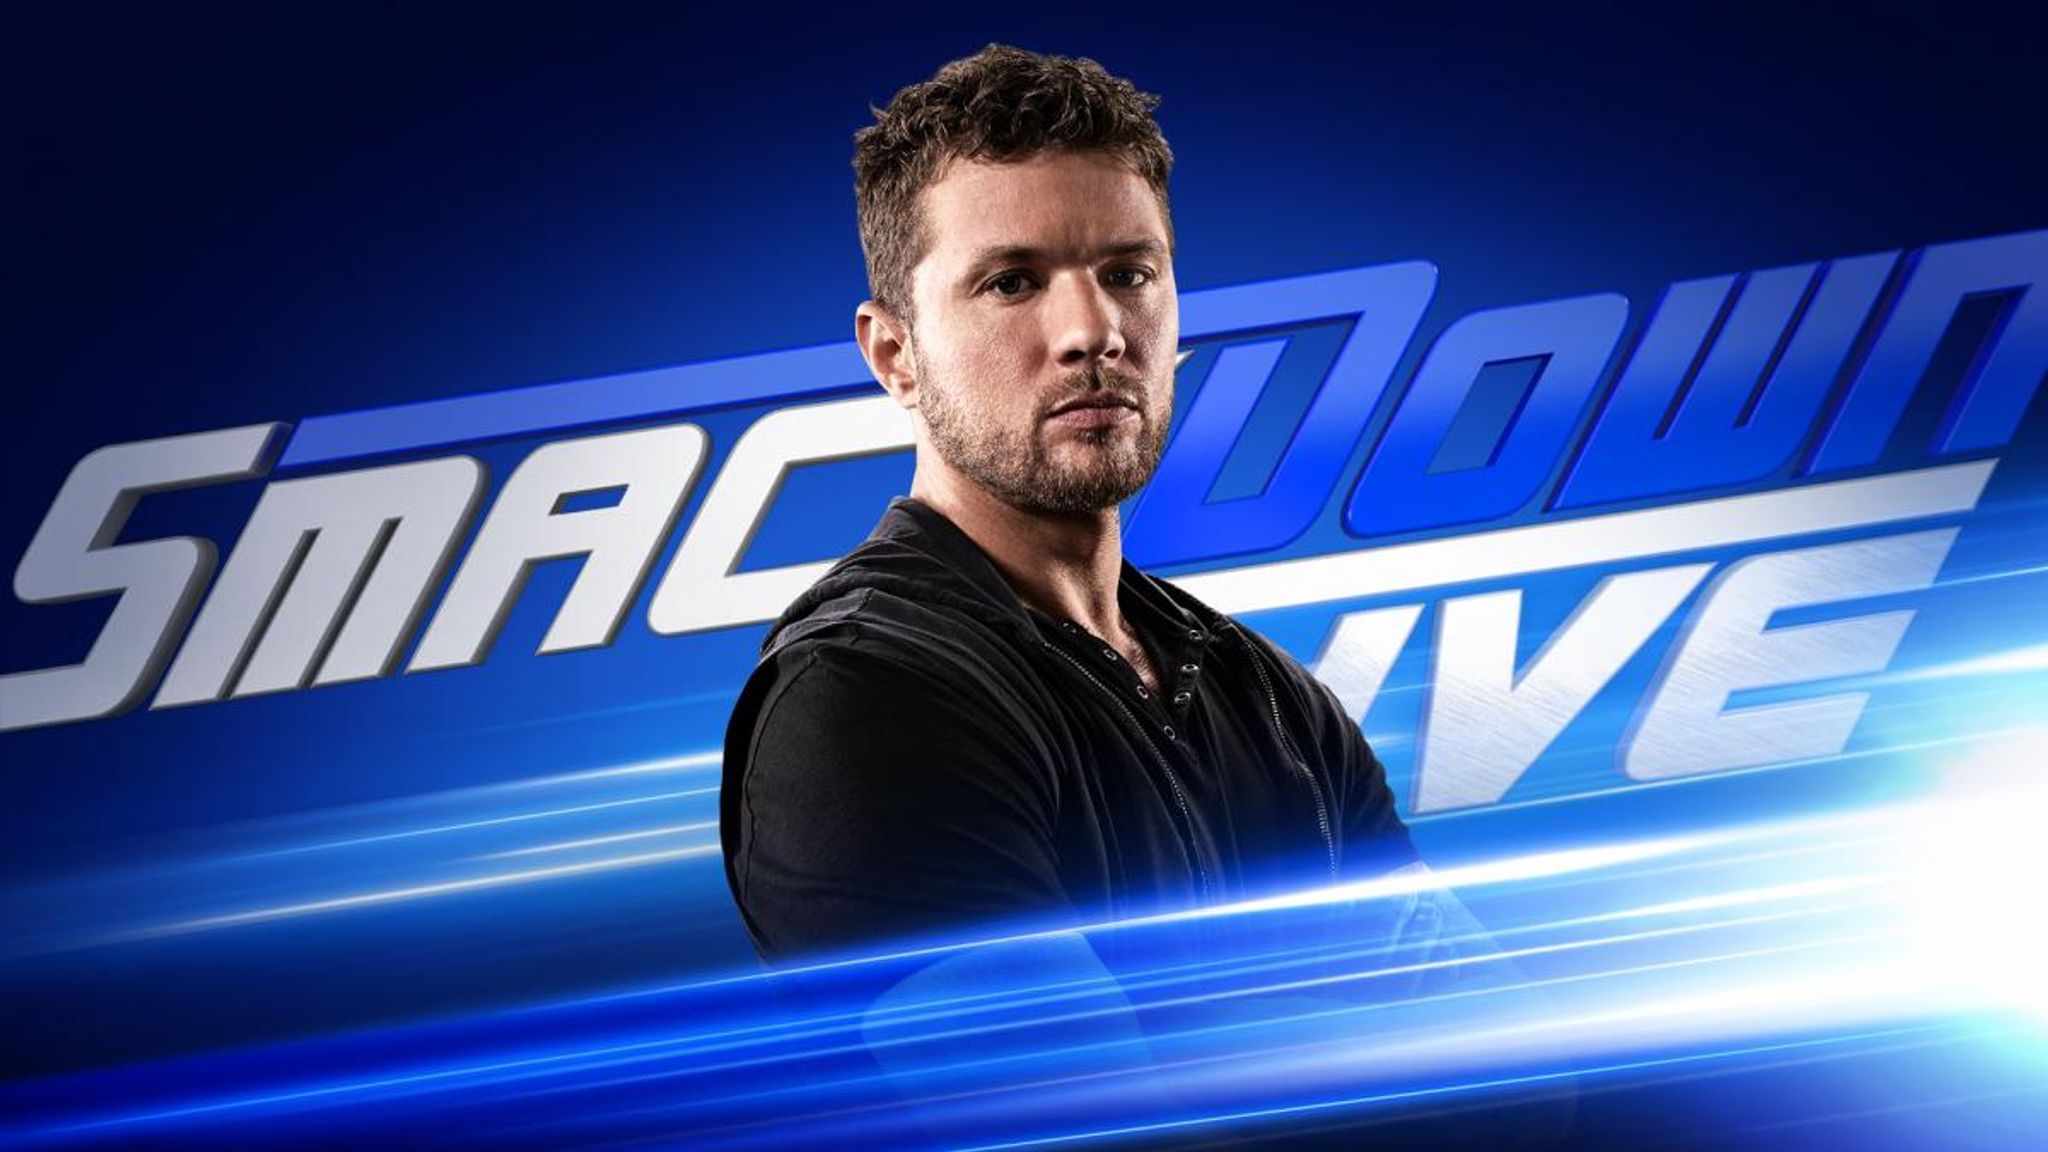 WWE Smackdown: American actor Ryan Phillippe to appear on Tuesday